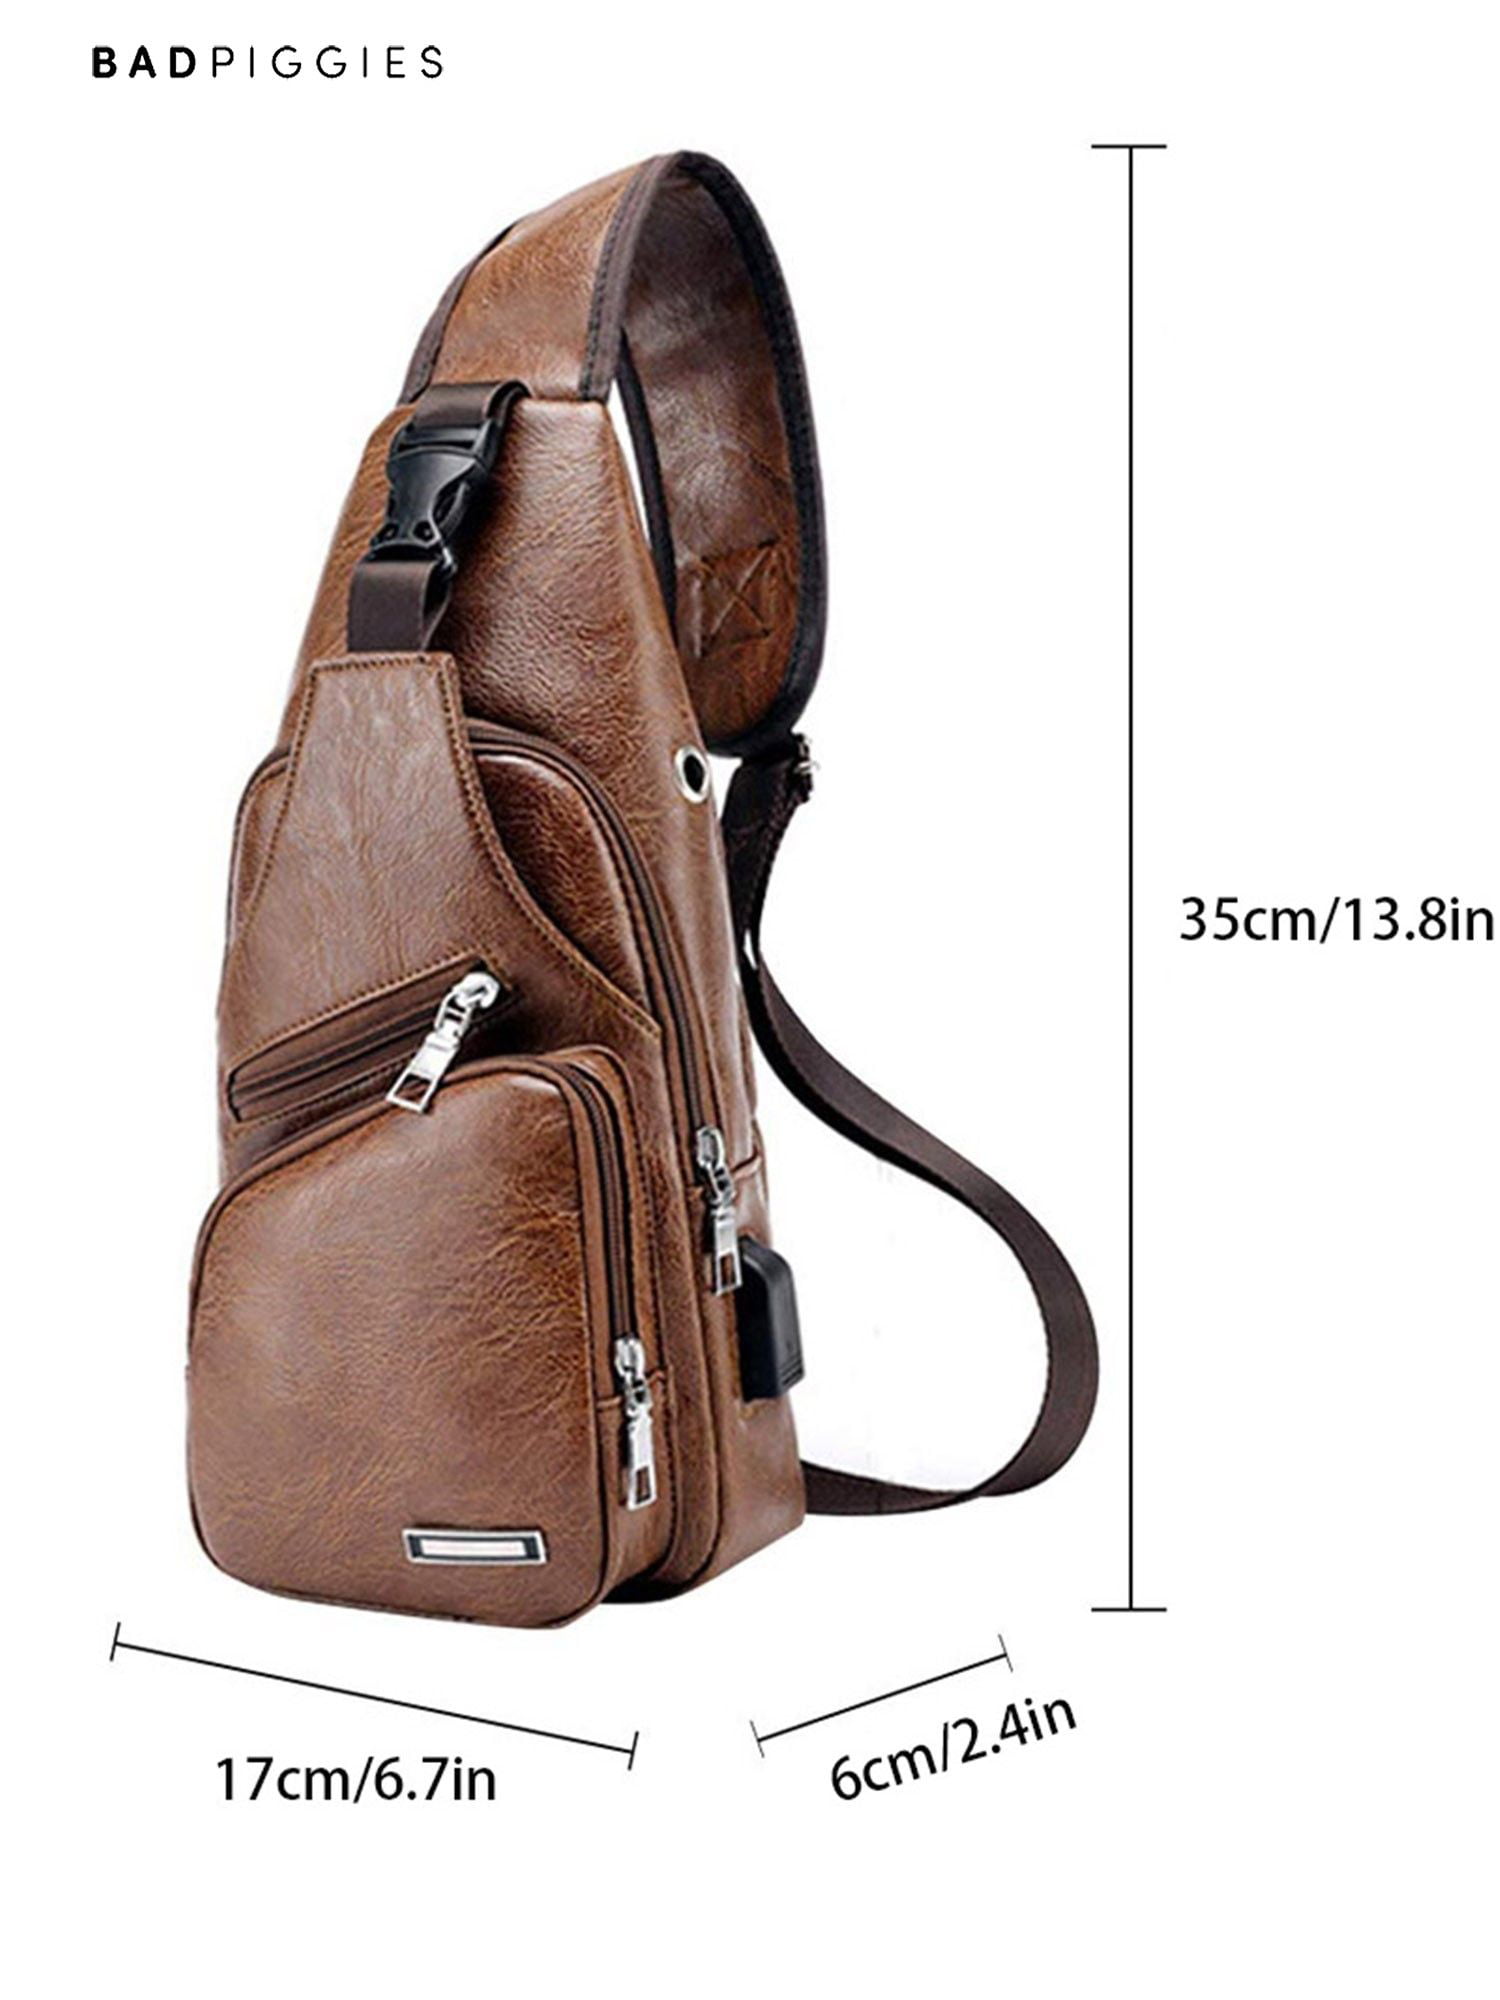 Men Crossbody Bags Messenger Leather Shoulder Bags Chest Bag With Headphone Hole 